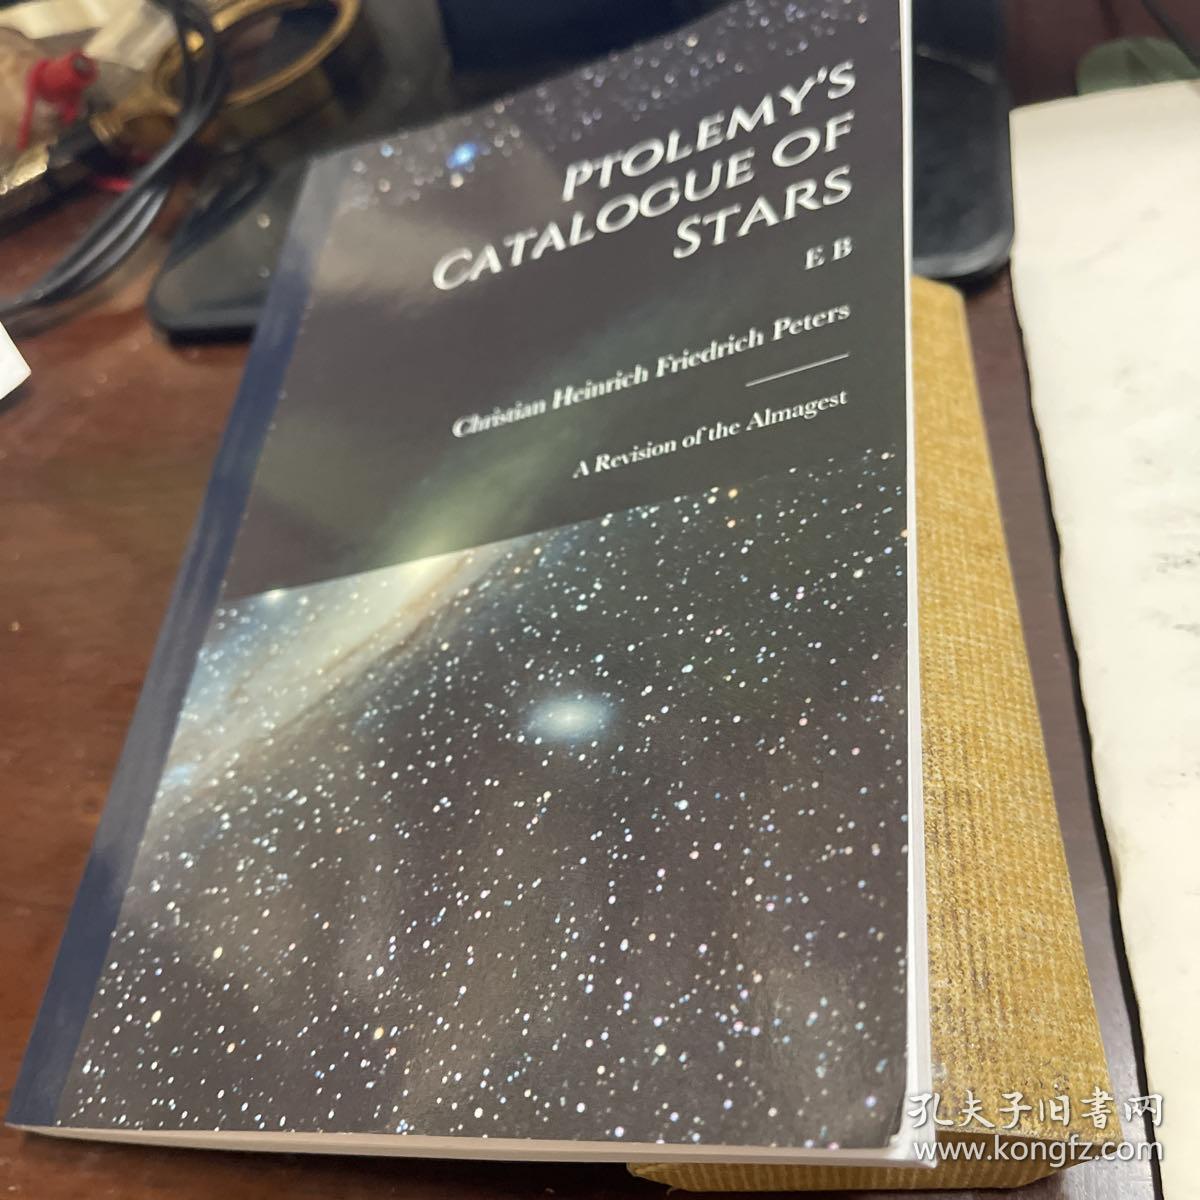 Ptolemy/s Catalogue of Stars A Revision of the Almagest